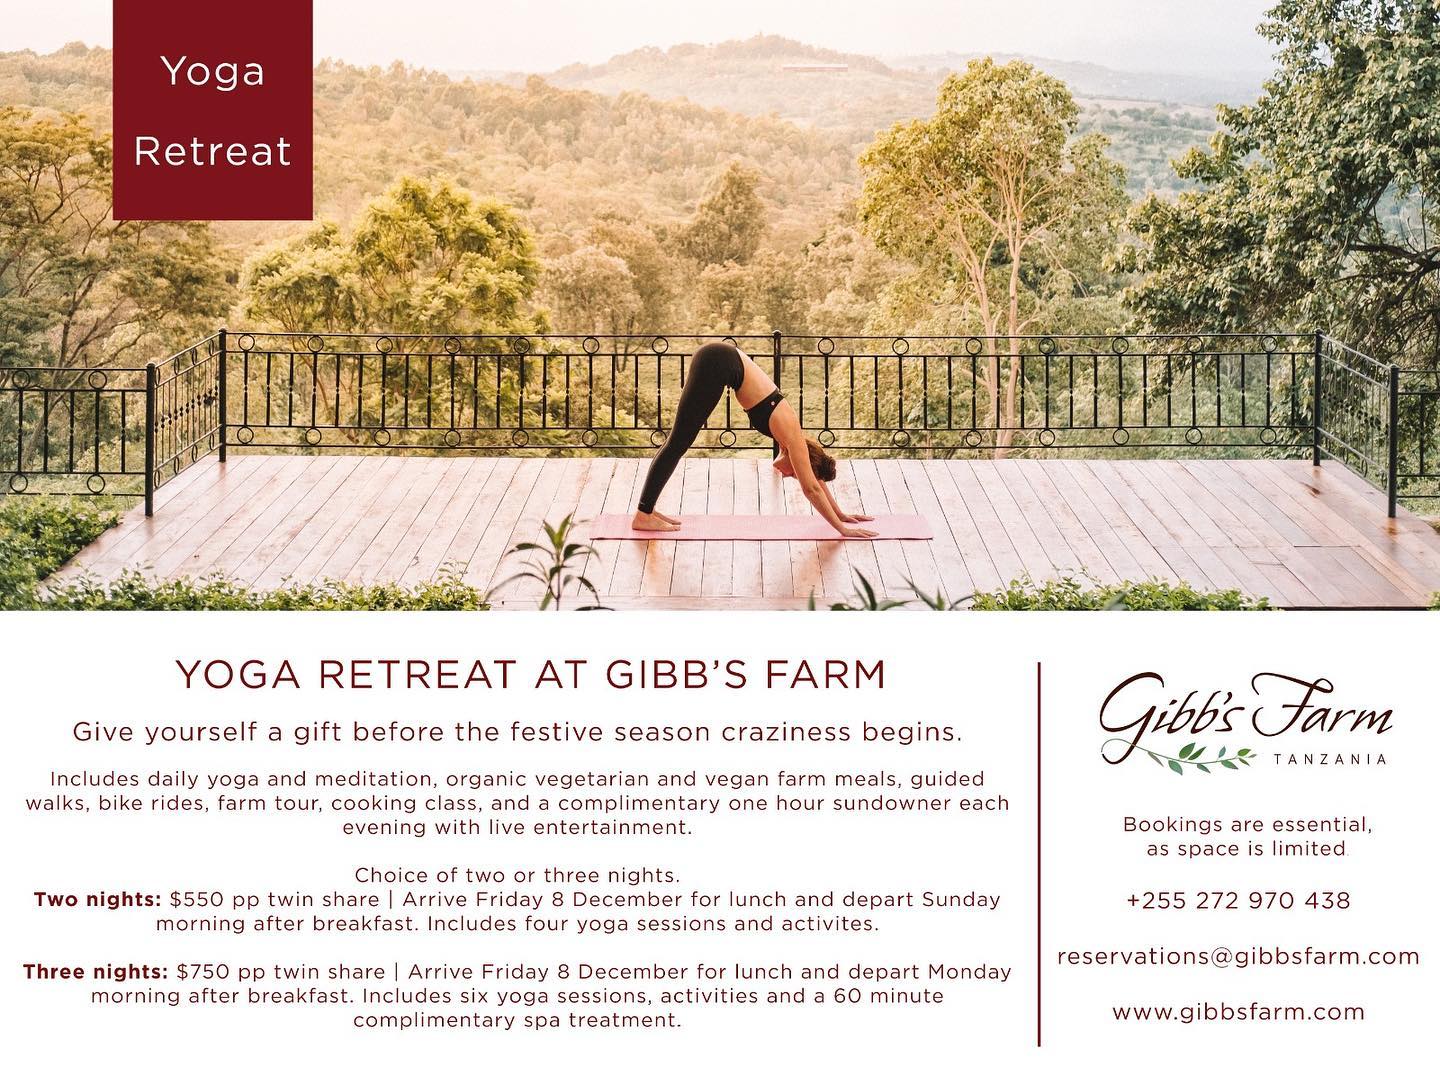 Treat yourself to a weekend at Gibb’s Farm for Yoga, relaxation and taking some time out for yourself. Spaces are limited. Book now so you don’t miss out! #wellnesstravel #wellness #retreat #sanctuary #relax #calm #calmbeforethestorm #yogaretreat #getaway #staycation #weekendaway